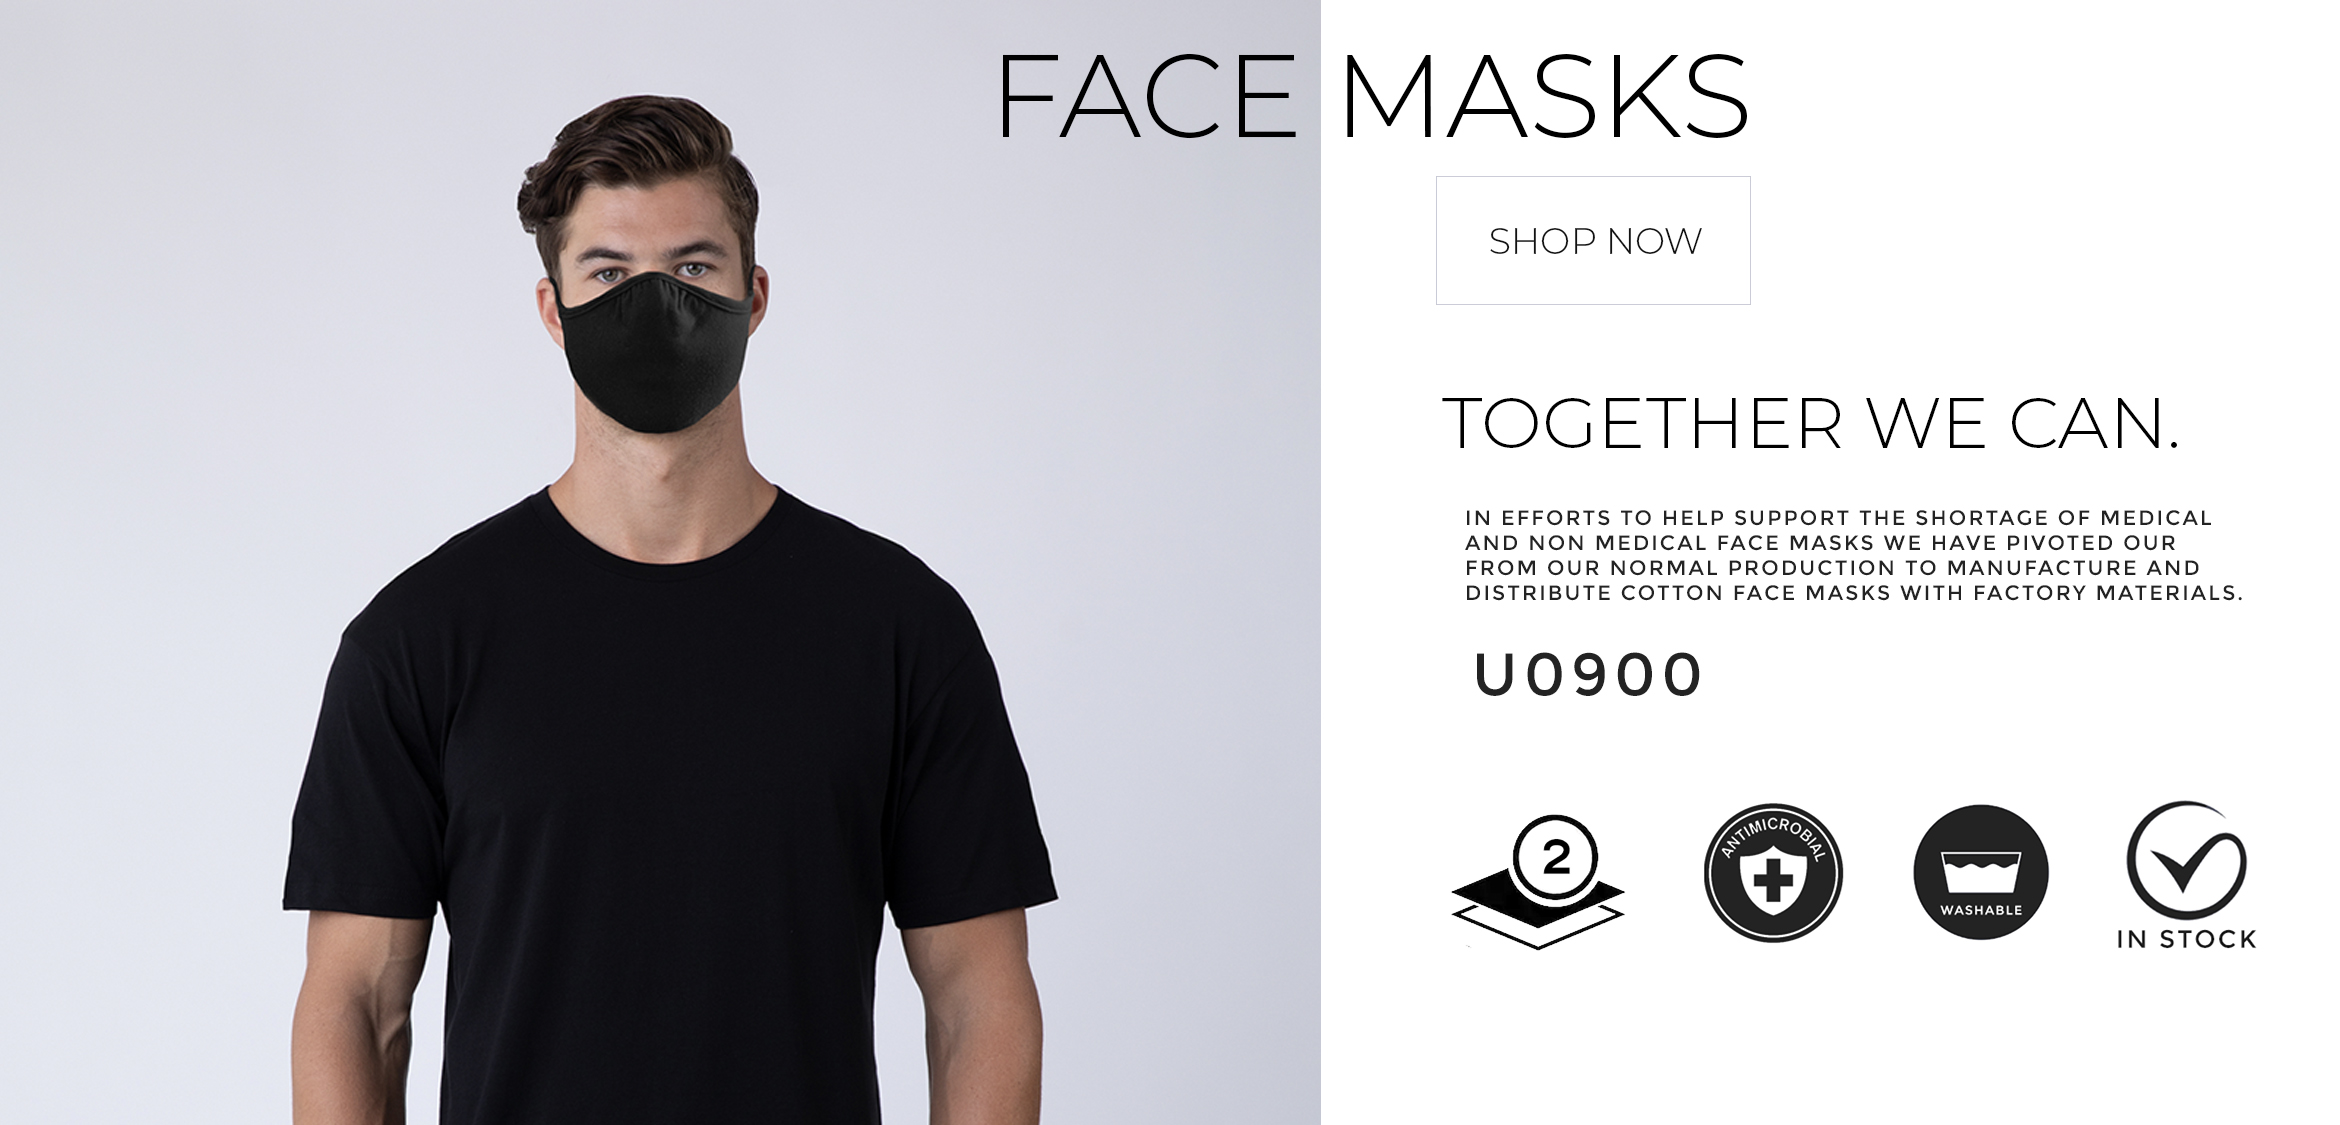 Face Masks - Shop Now - Together We Can. In efforts to help support the shortage of medical and non-medical face masks we have pivoted from our normal production to manufacture and distribute cotton face masks with factory materials. U0900 - Two ply - Antimicrobial - Washable - In Stock